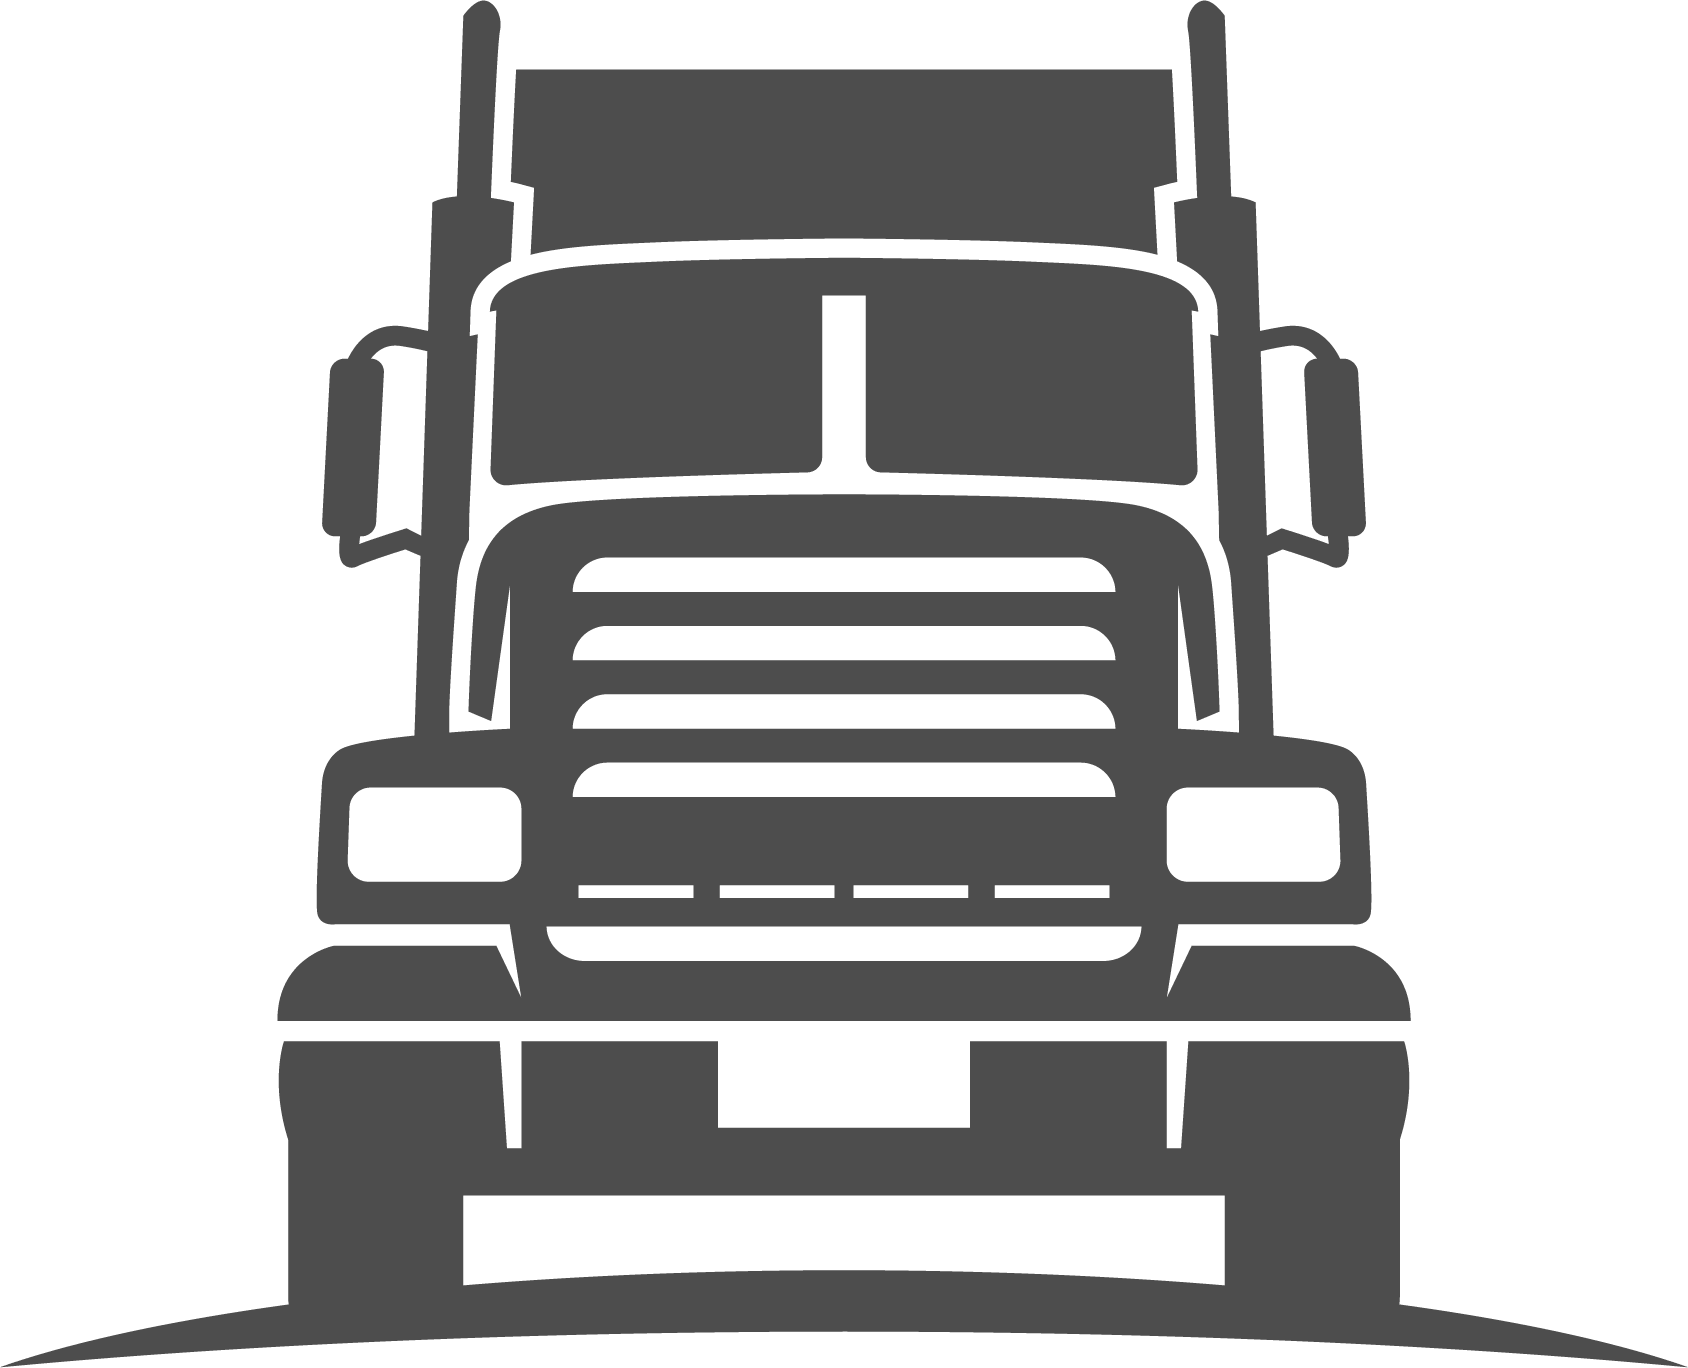 Form 2290 Electronic Filing truck image